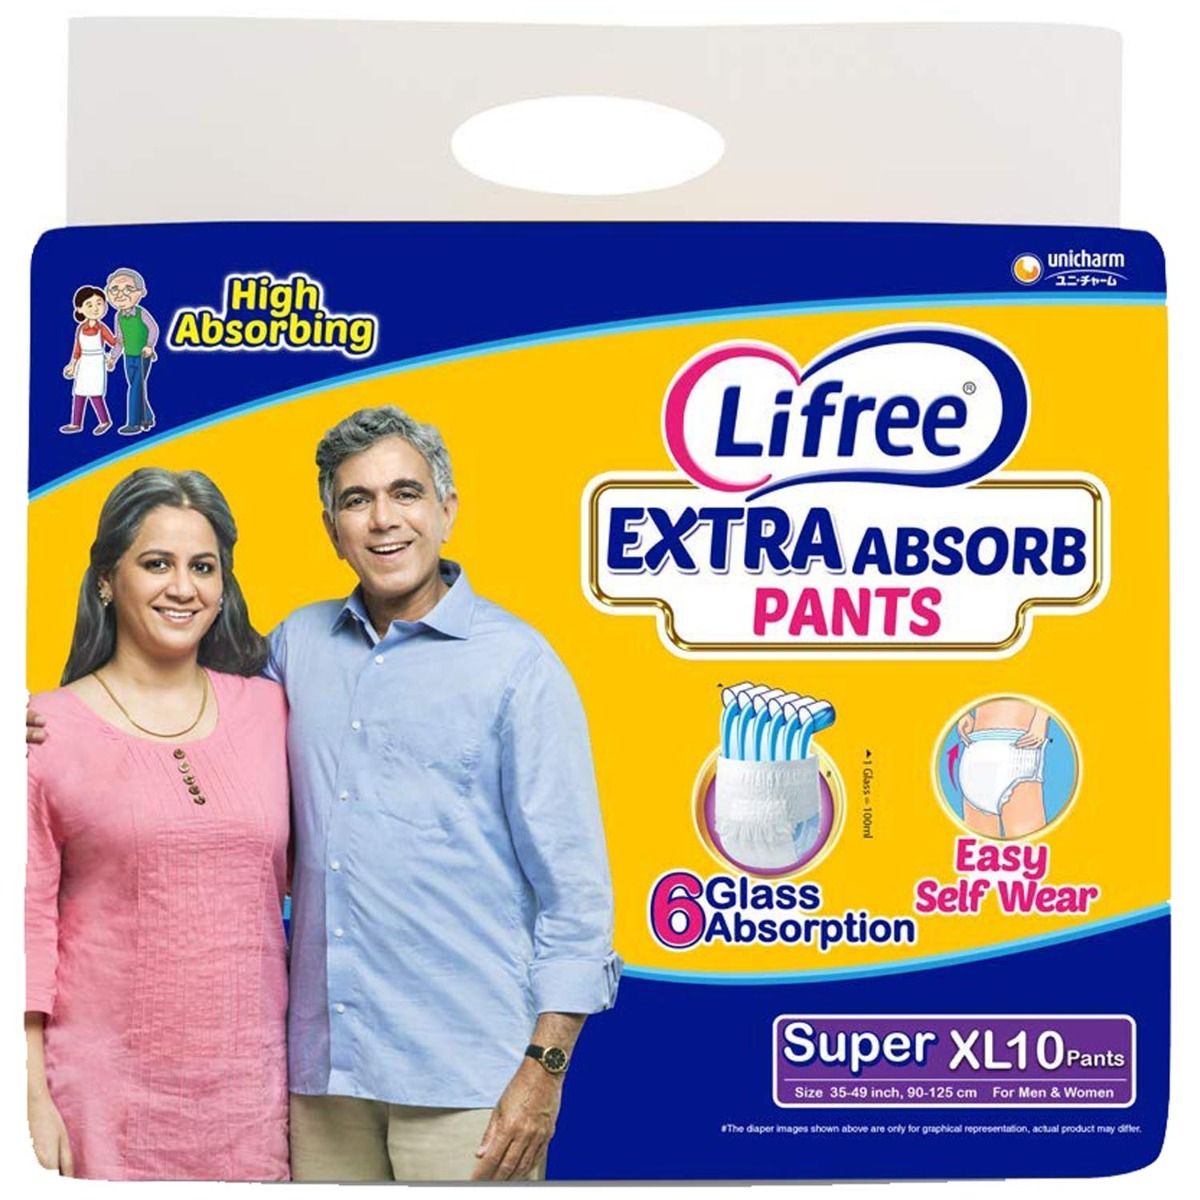 Lifree Extra Absorb Adult Diaper Pants XL, 10 Count, Pack of 1 